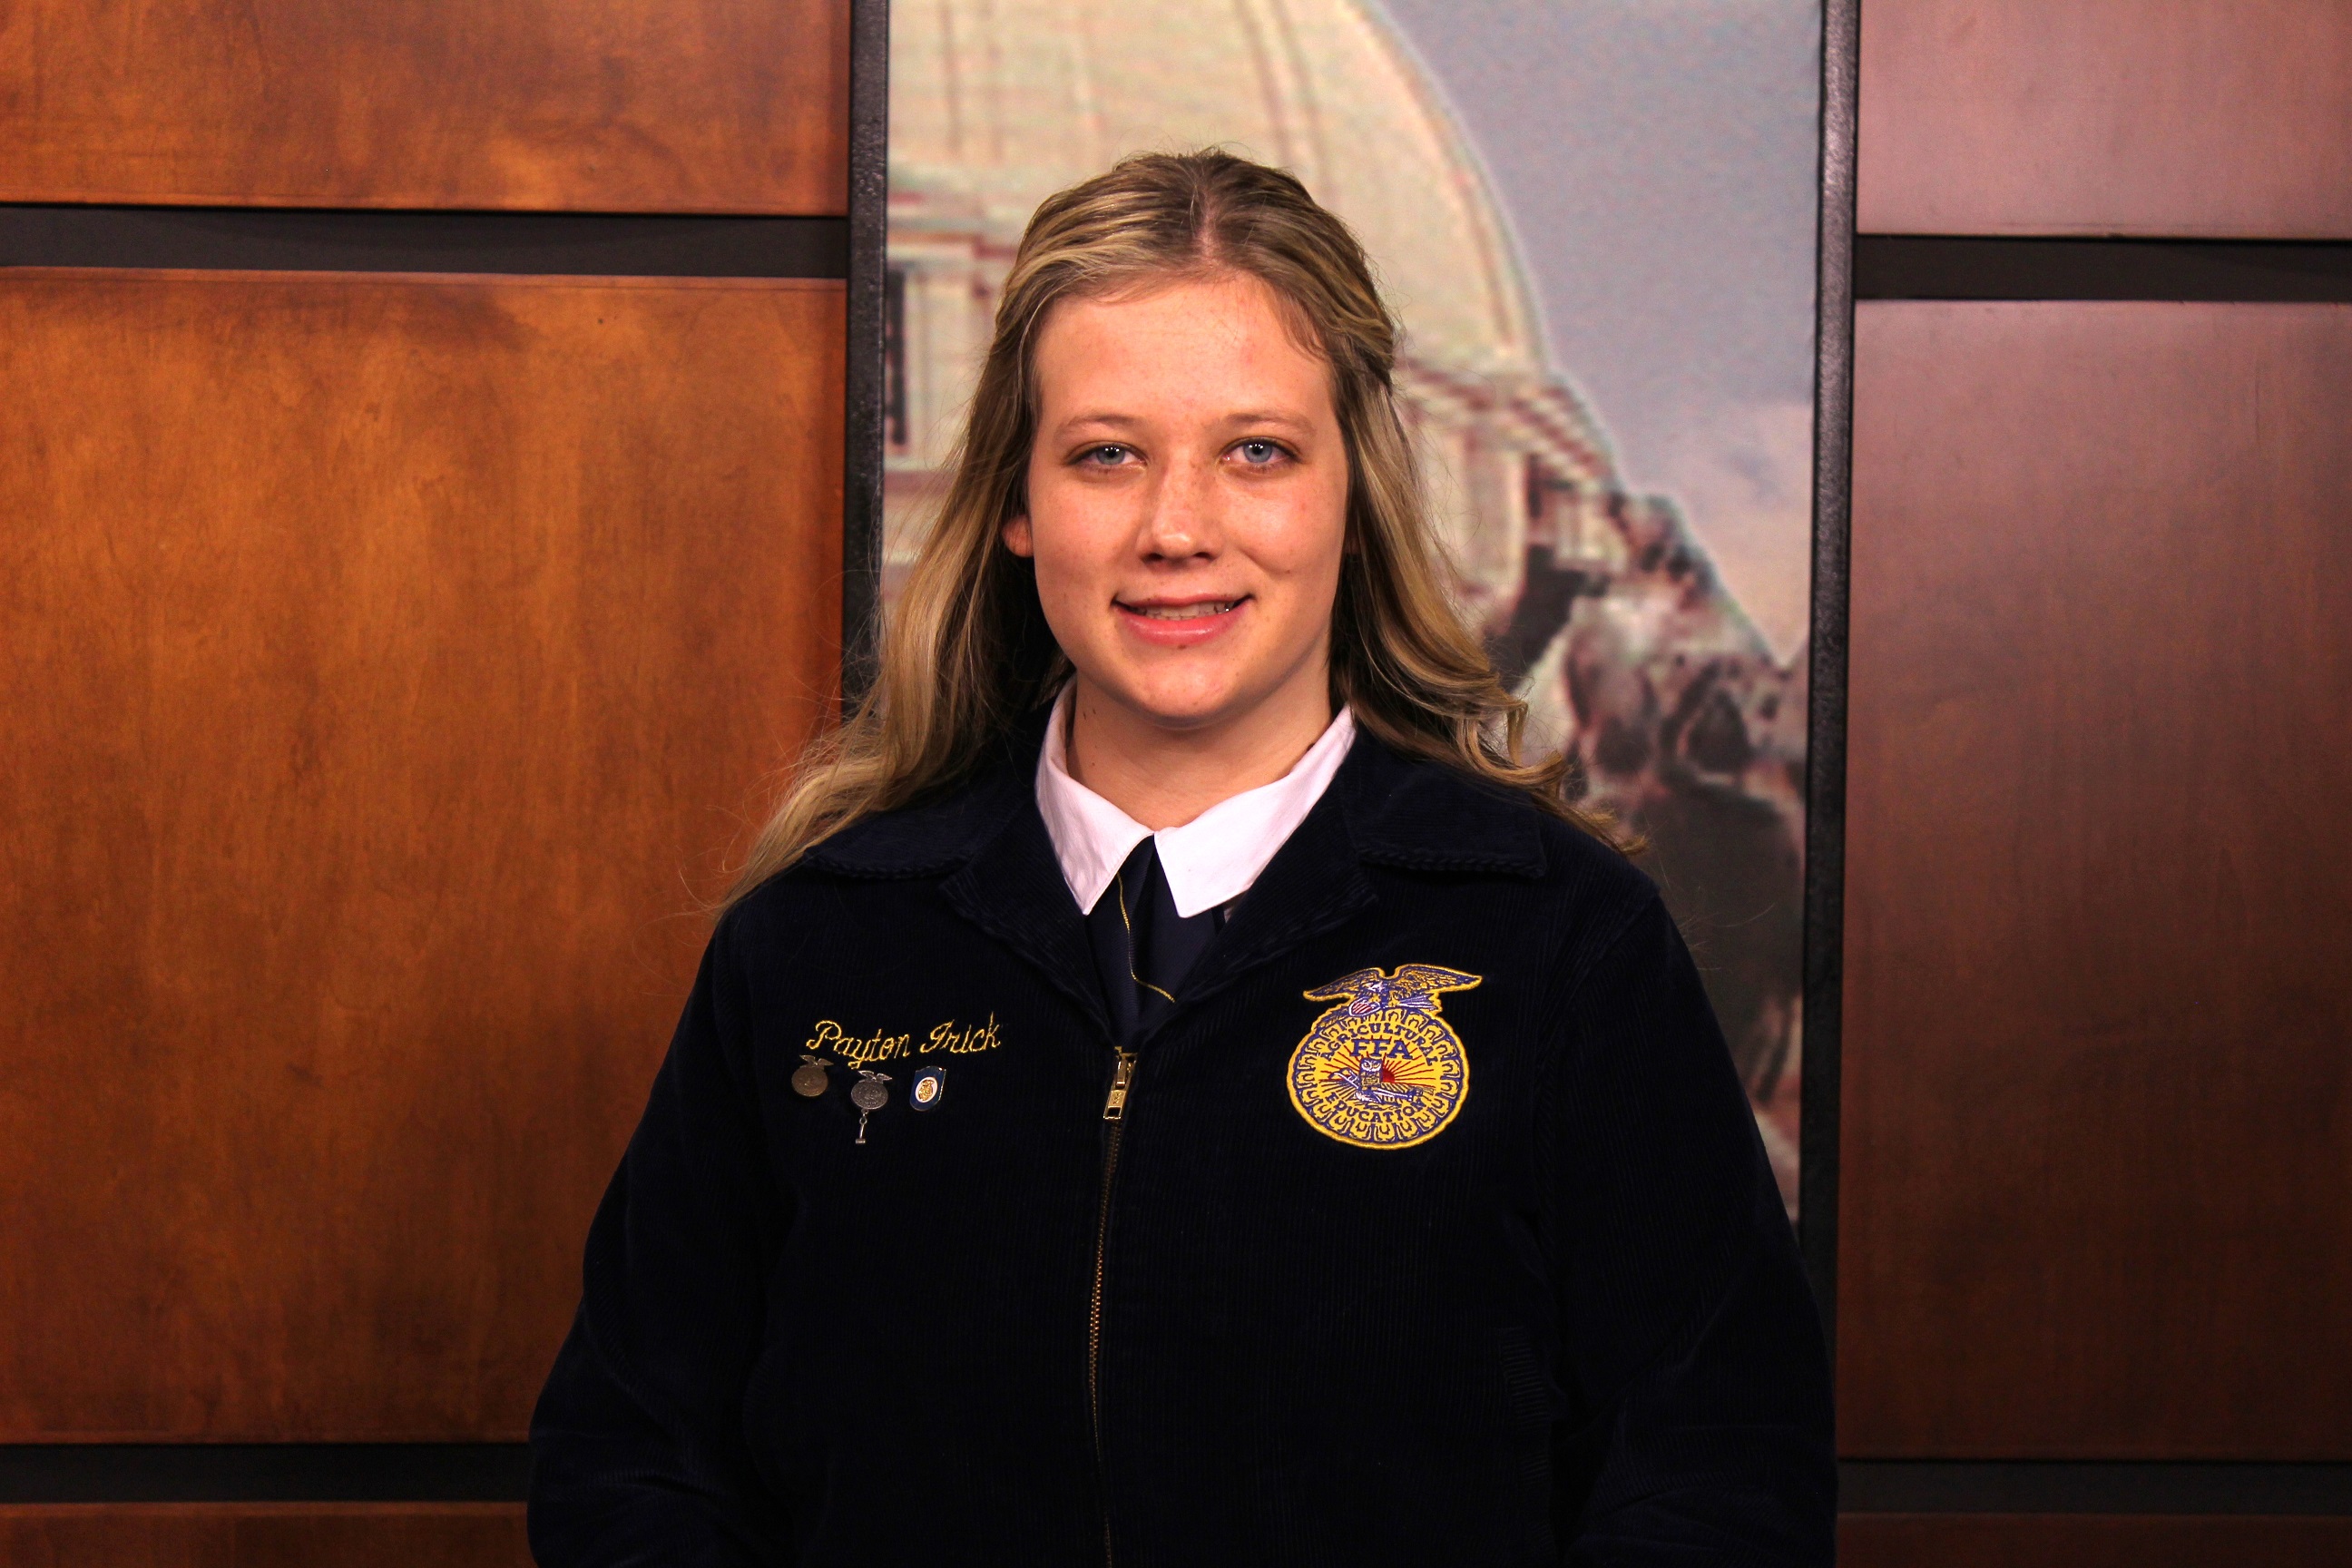 Introducing Payton Irick of the Seminole FFA Chapter, Your 2022 Southeast Area Star in Agricultural Production